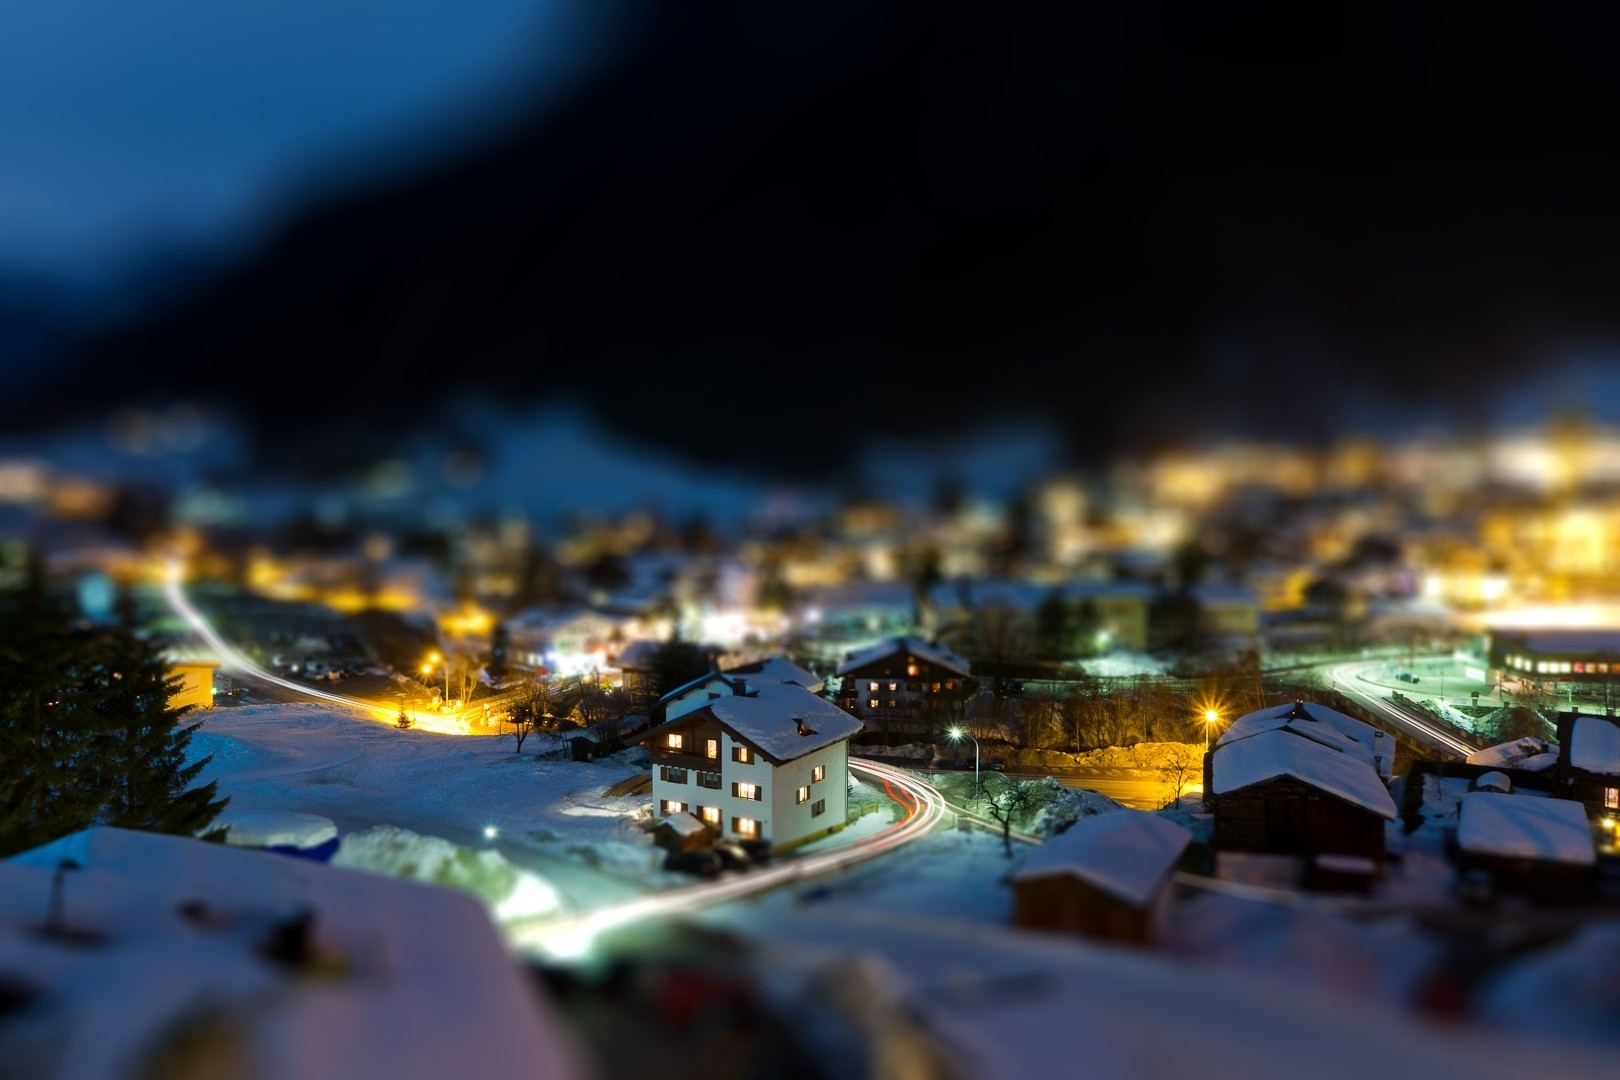 architecture, House, Tilt Shift, Town, Trees, Nature, Winter, Snow, Night, Lights, Road, Street, Mountain, Rooftops, Long Exposure, Light Trails Wallpaper